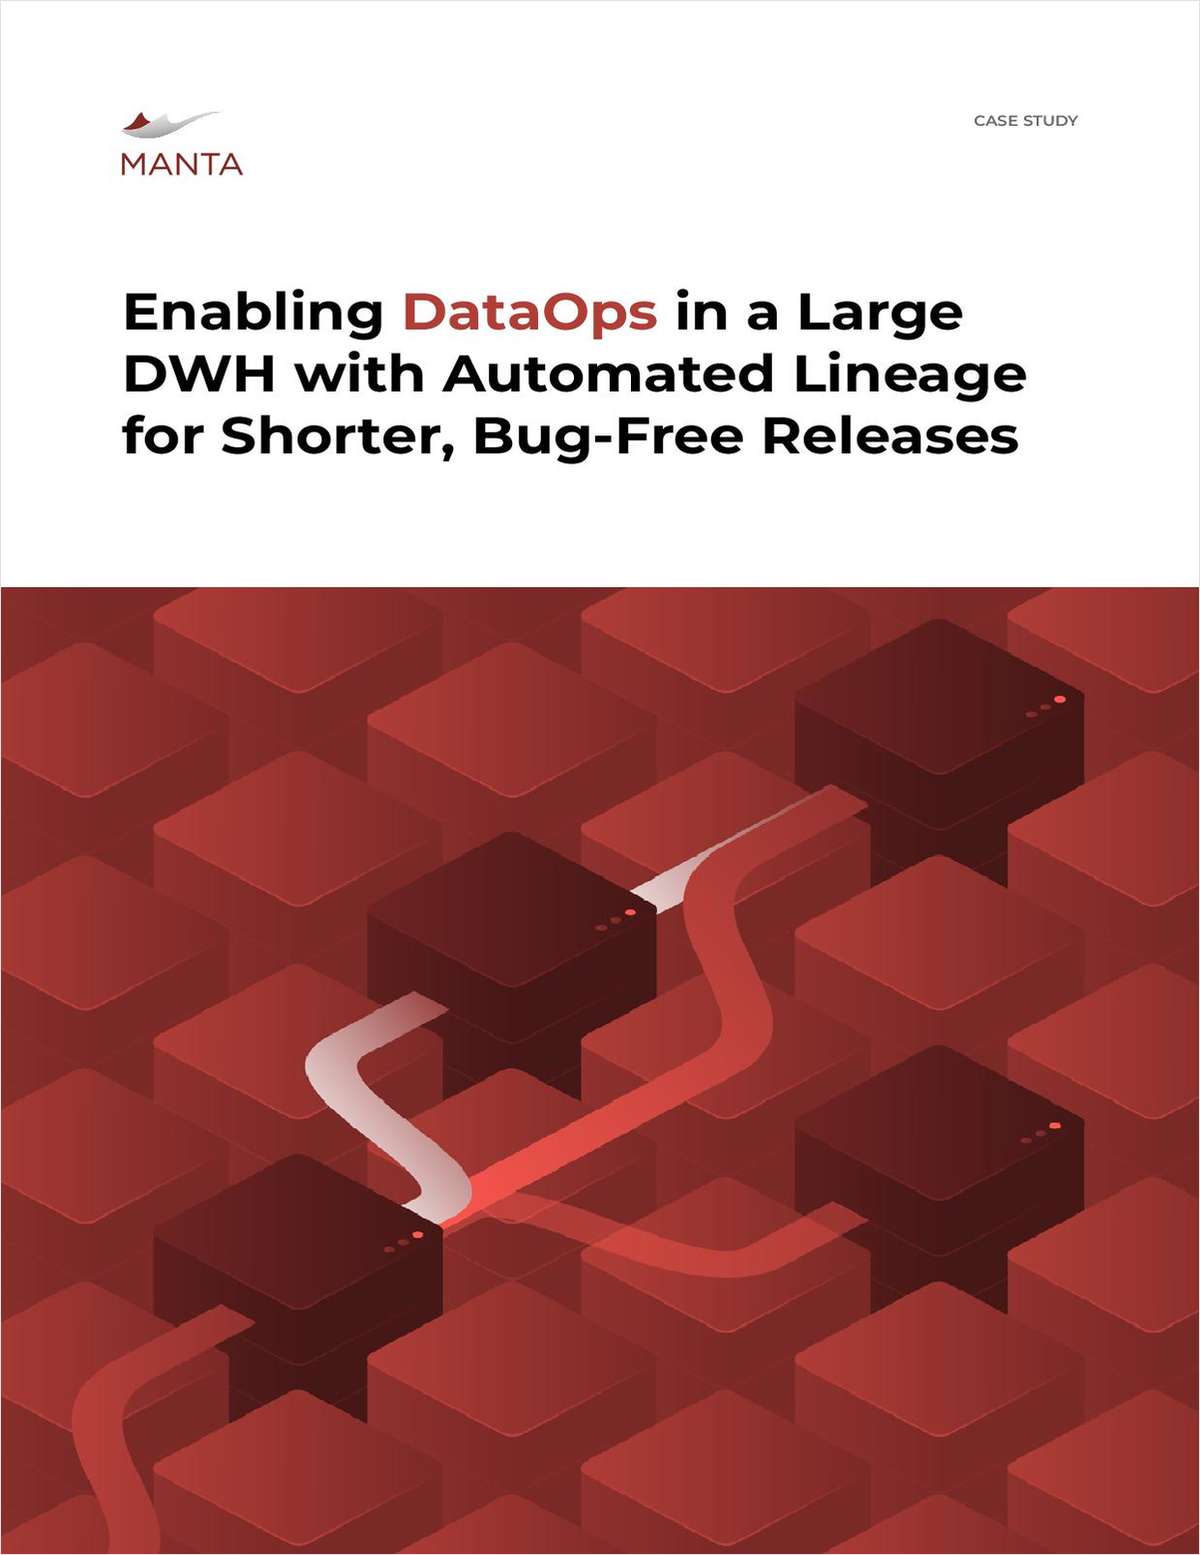 Enabling DataOps in a Large DWH with Automated Lineage for Shorter, Bug-Free Releases